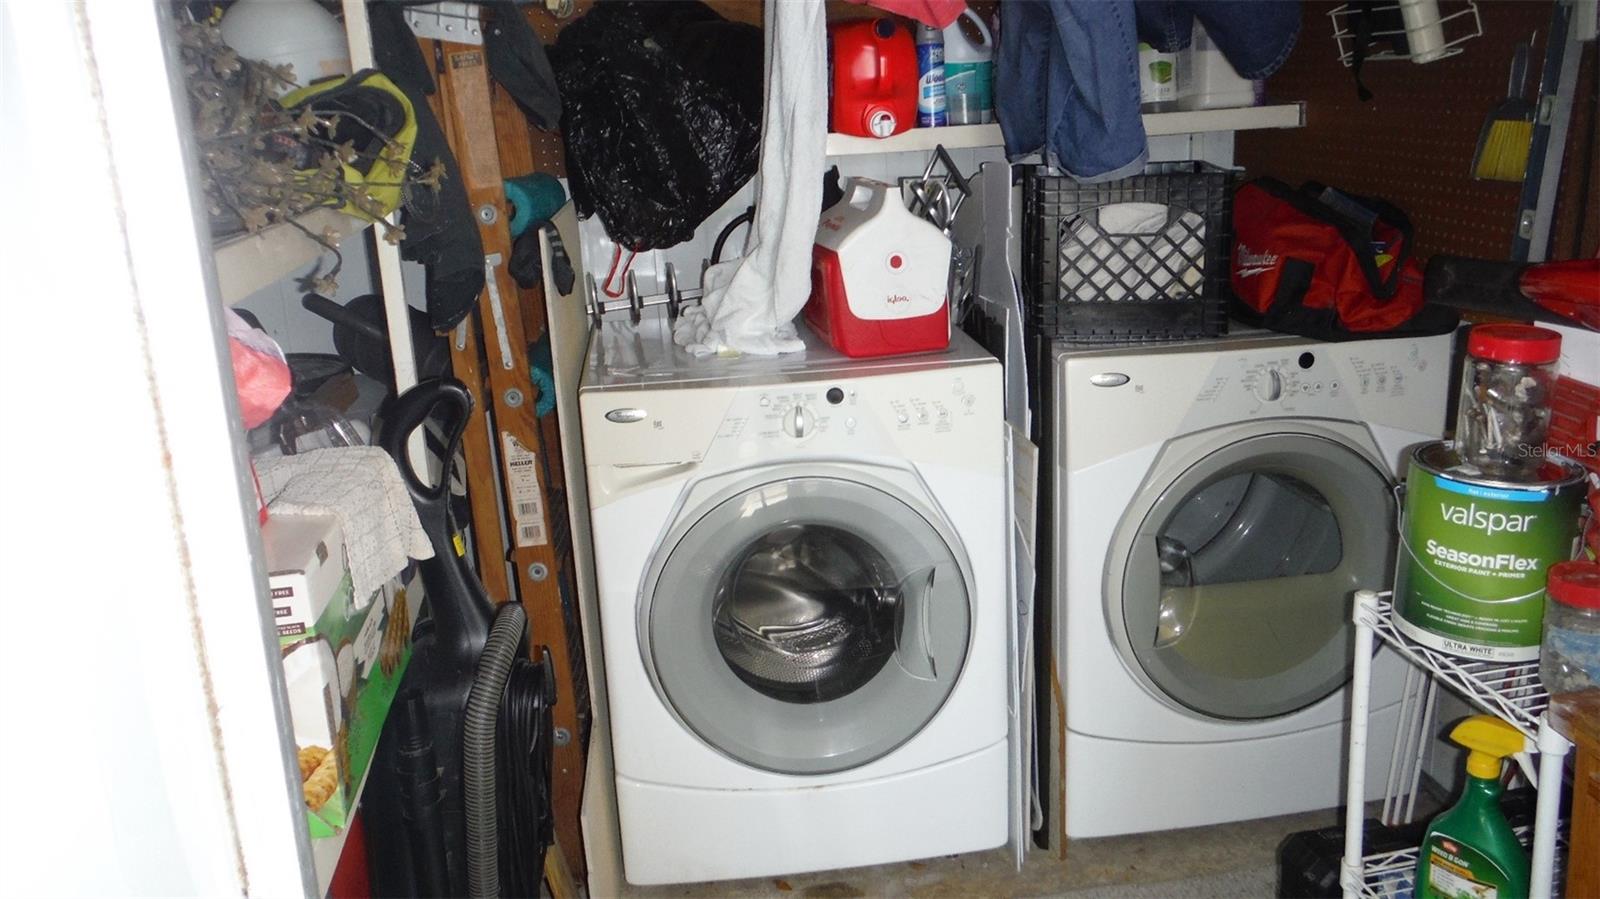 Washer & Dryer in Shed